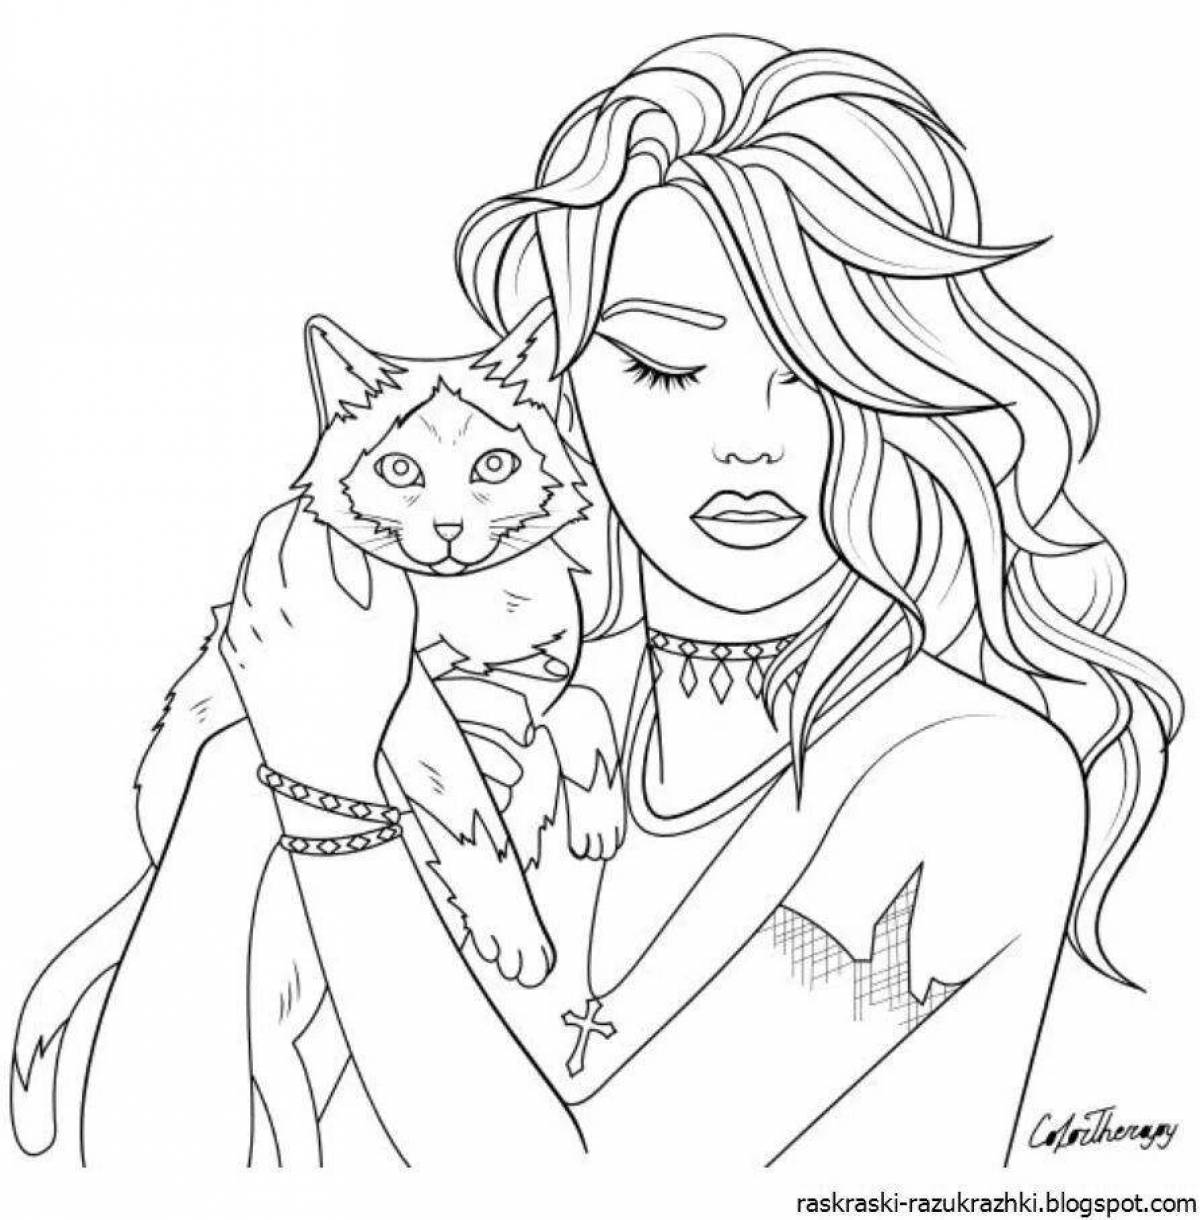 Animated cat girl coloring book